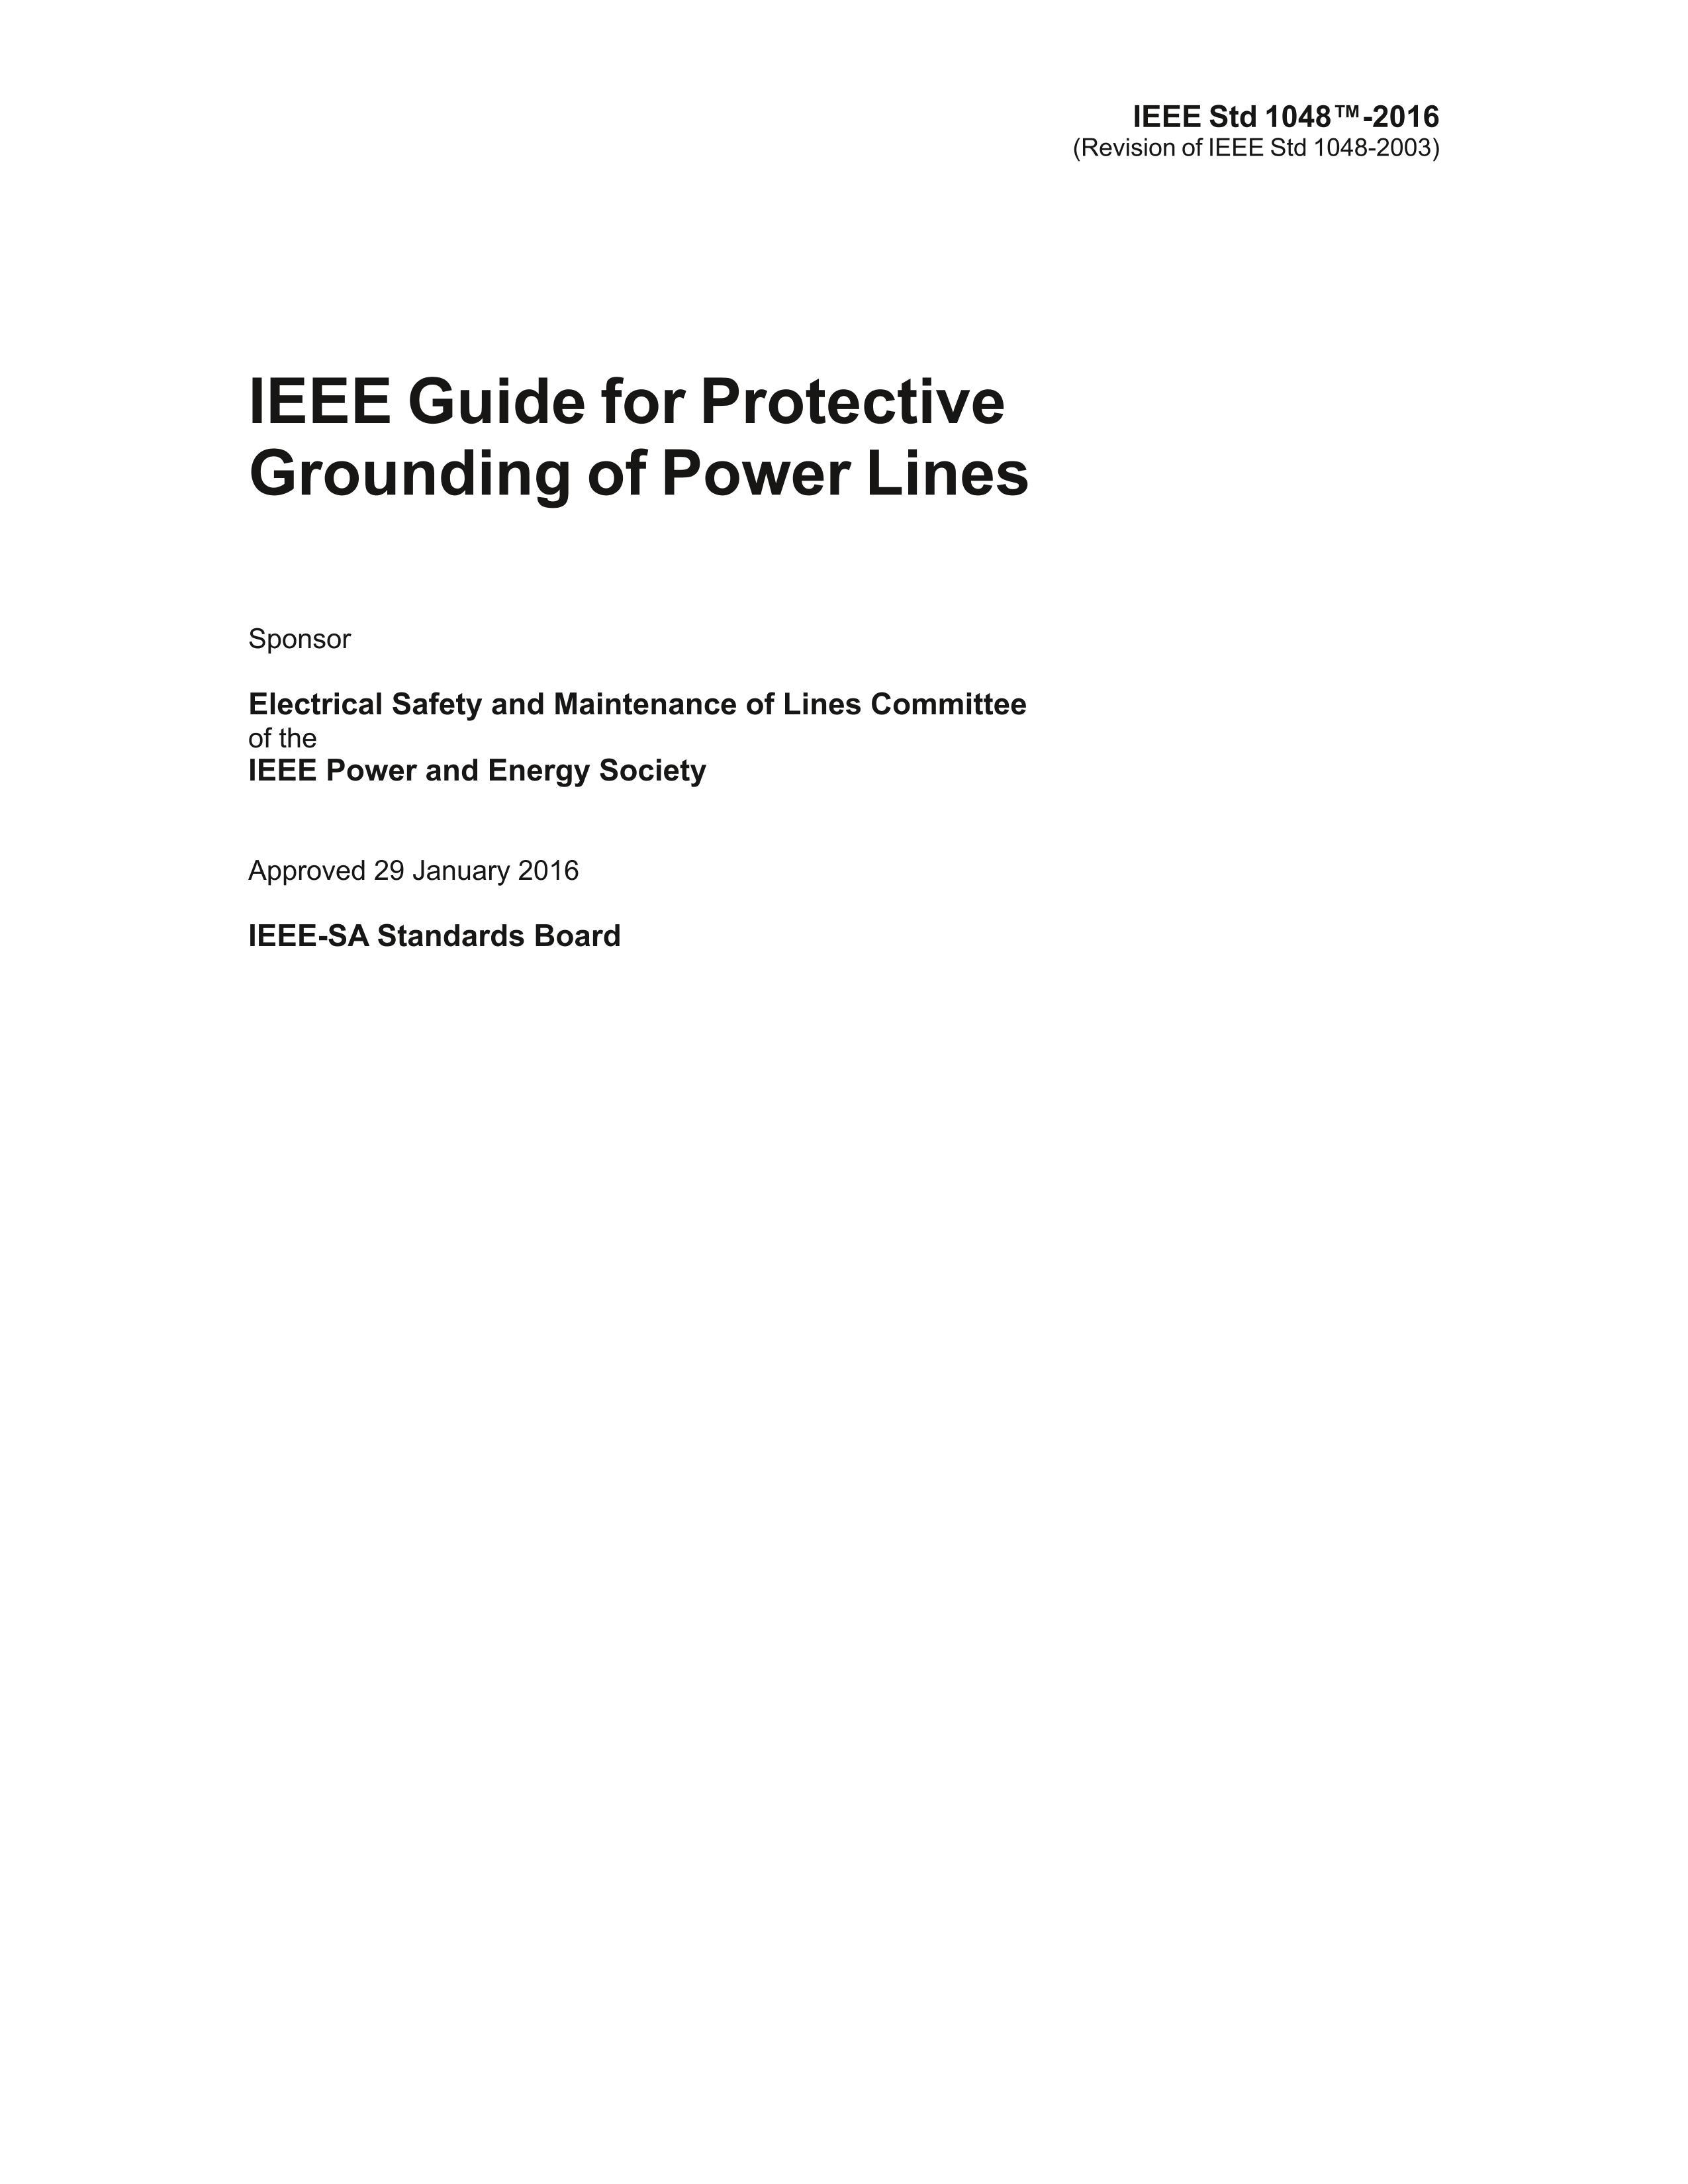 IEEE Std 1048-2016 IEEE Guide for Protective Grounding of Power Lines.PDF2ҳ